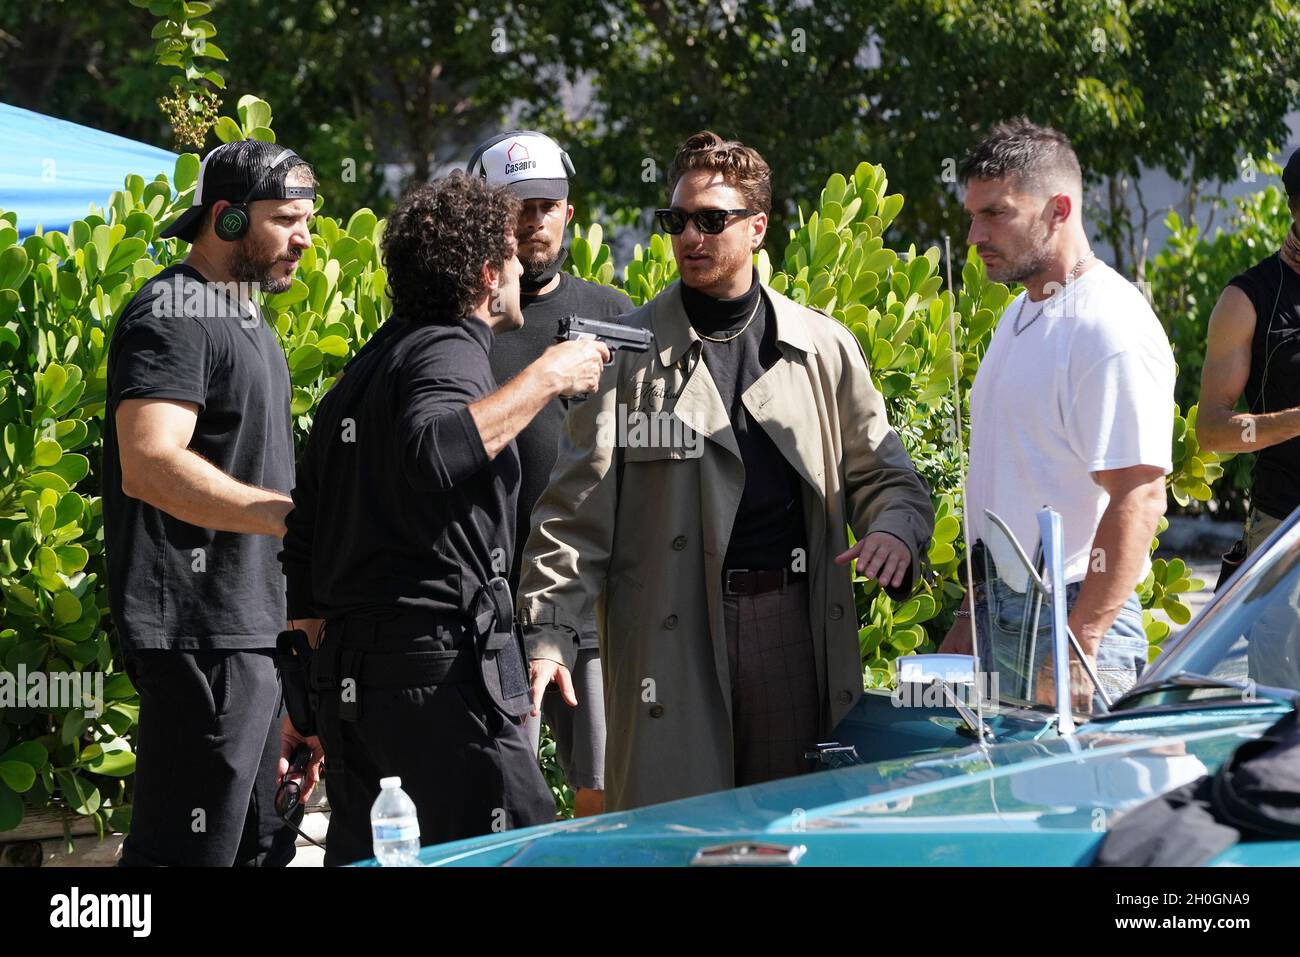 MIAMI, FL - OCT 12: Actor Julian Gil (R) is seen during the behind the scene filming of “CERDO” on October 12, 2021 in Miami, Florida. (Photo by Alberto E. Tamargo/Sipa USA) Stock Photo